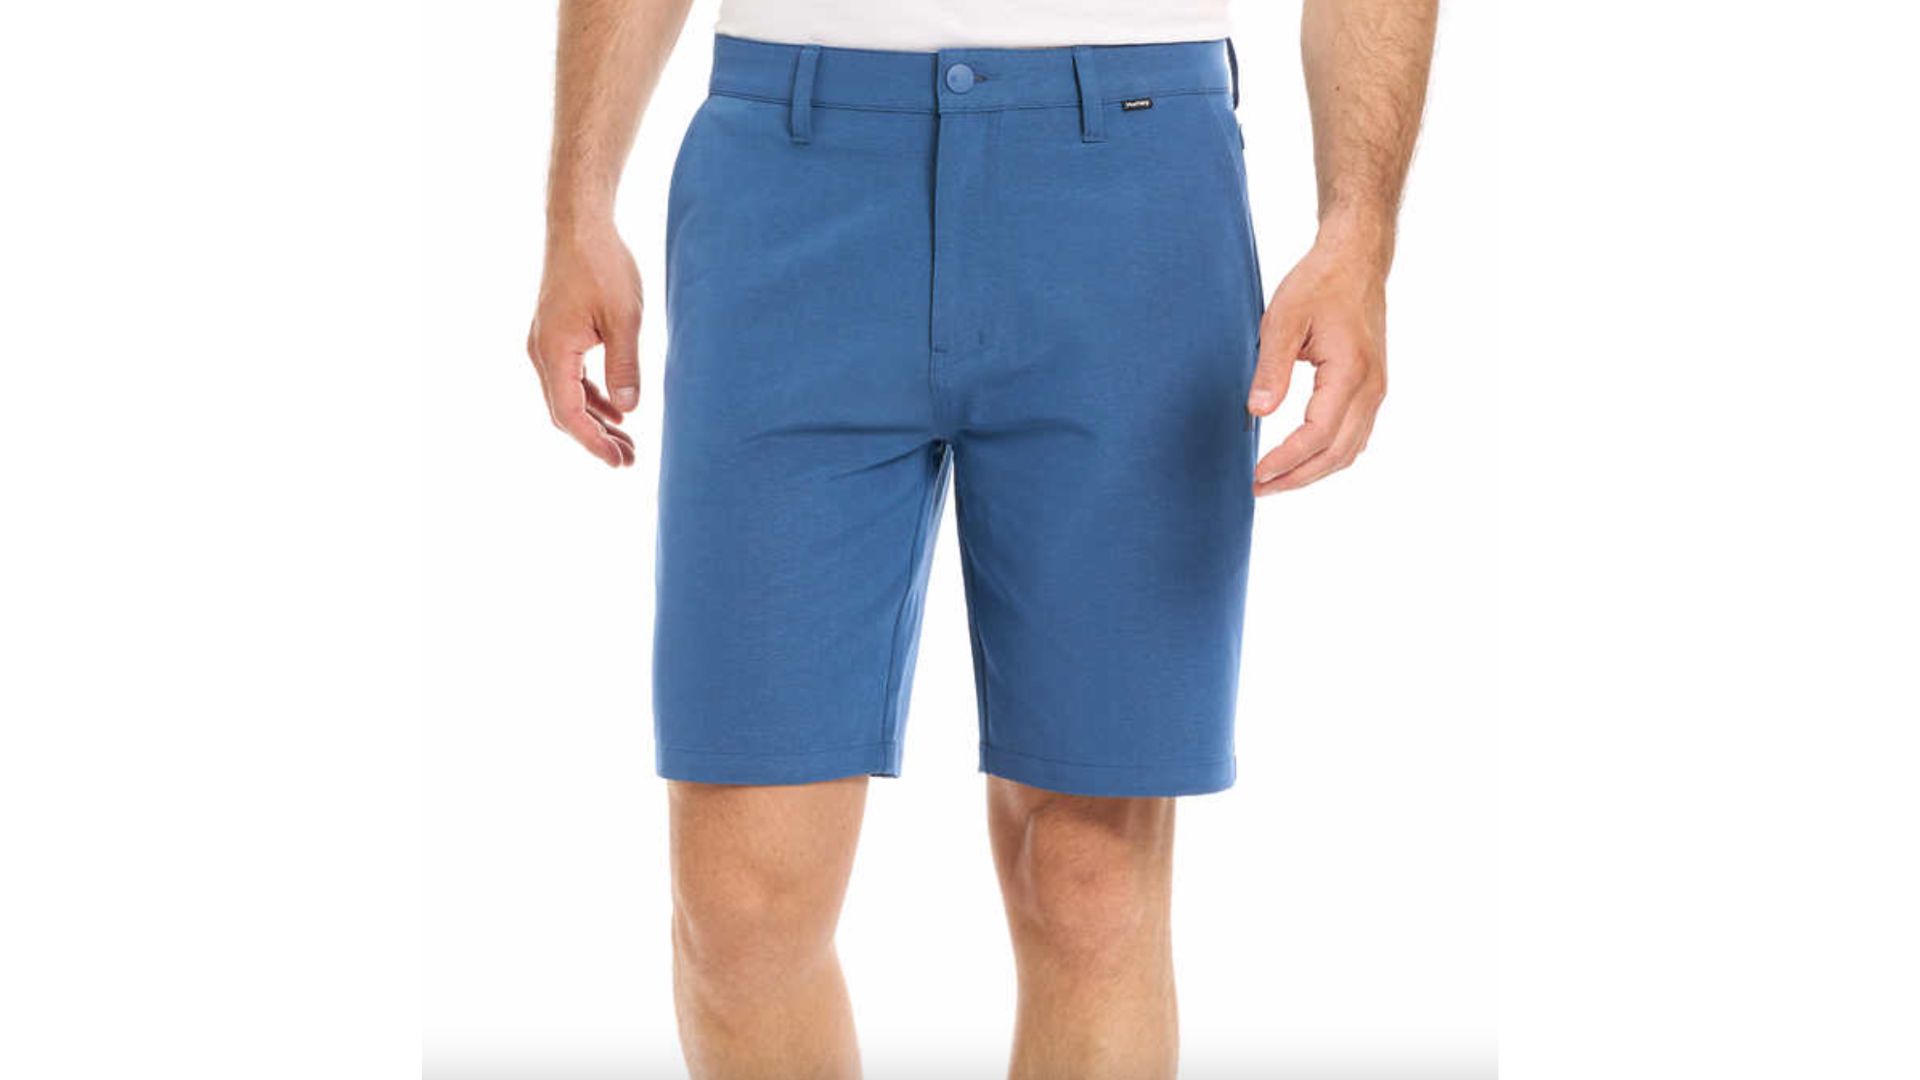 <ul> <li><strong>Price:</strong> <a href="https://www.costco.com/hurley-men%E2%80%99s-hybrid-short.product.4000194514.html" rel="noreferrer noopener">$16.99</a></li> </ul> <p>Originally priced at $20.99 per pair, Costco members receive $4 off Hurley men's hybrid shorts. </p> <p>Each pair of shorts features two front pockets, two back pockets and a hidden zip pocket at the left side seam. A wide range of men's sizes are available to shop, and short colors to choose from include blue, gray and tan.</p> <p><strong>For You: <a href="https://www.gobankingrates.com/saving-money/shopping/costco-will-give-you-free-groceries-in-exchange-for-old-electronics/?utm_term=related_link_3&utm_campaign=1263709&utm_source=msn.com&utm_content=5&utm_medium=rss" rel="">Costco Will Give You Free Groceries in Exchange for Old Electronics; Here's How To Take Advantage</a> <br>Check Out: <a href="https://www.gobankingrates.com/saving-money/food/10-best-members-mark-pantry-products-to-pick-up-at-sams-club/?utm_term=related_link_4&utm_campaign=1263709&utm_source=msn.com&utm_content=6&utm_medium=rss" rel="">10 Best Member's Mark Pantry Products To Pick Up at Sam's Club</a></strong></p> <p><strong>Sponsored: </strong><a href="https://products.gobankingrates.com/pub/9e562dc4-52f4-11ec-a8c2-0e0b1012e14d?targeting%5Bcompany_product%5D=tra&utm_source=msn.com&utm_campaign=rss&passthru=msn.com" rel="noreferrer noopener nofollow">Owe the IRS $10K or more? Schedule a FREE consultation to see if you qualify for tax relief.</a></p>